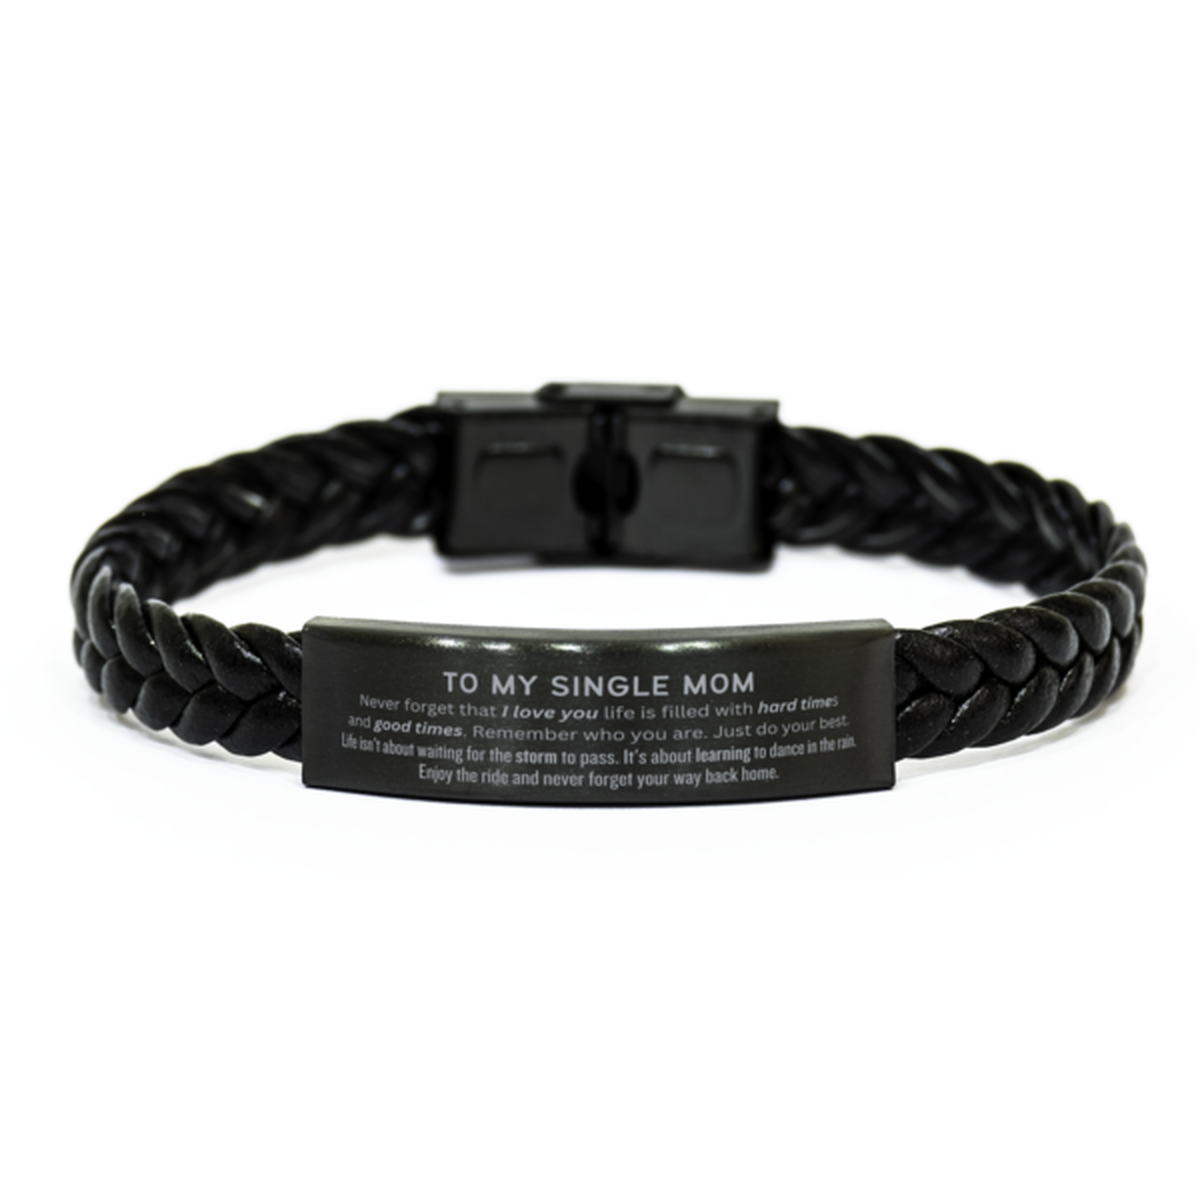 Christmas Single Mom Braided Leather Bracelet Gifts, To My Single Mom Birthday Thank You Gifts For Single Mom, Graduation Unique Gifts For Single Mom To My Single Mom Never forget that I love you life is filled with hard times and good times. Remember who